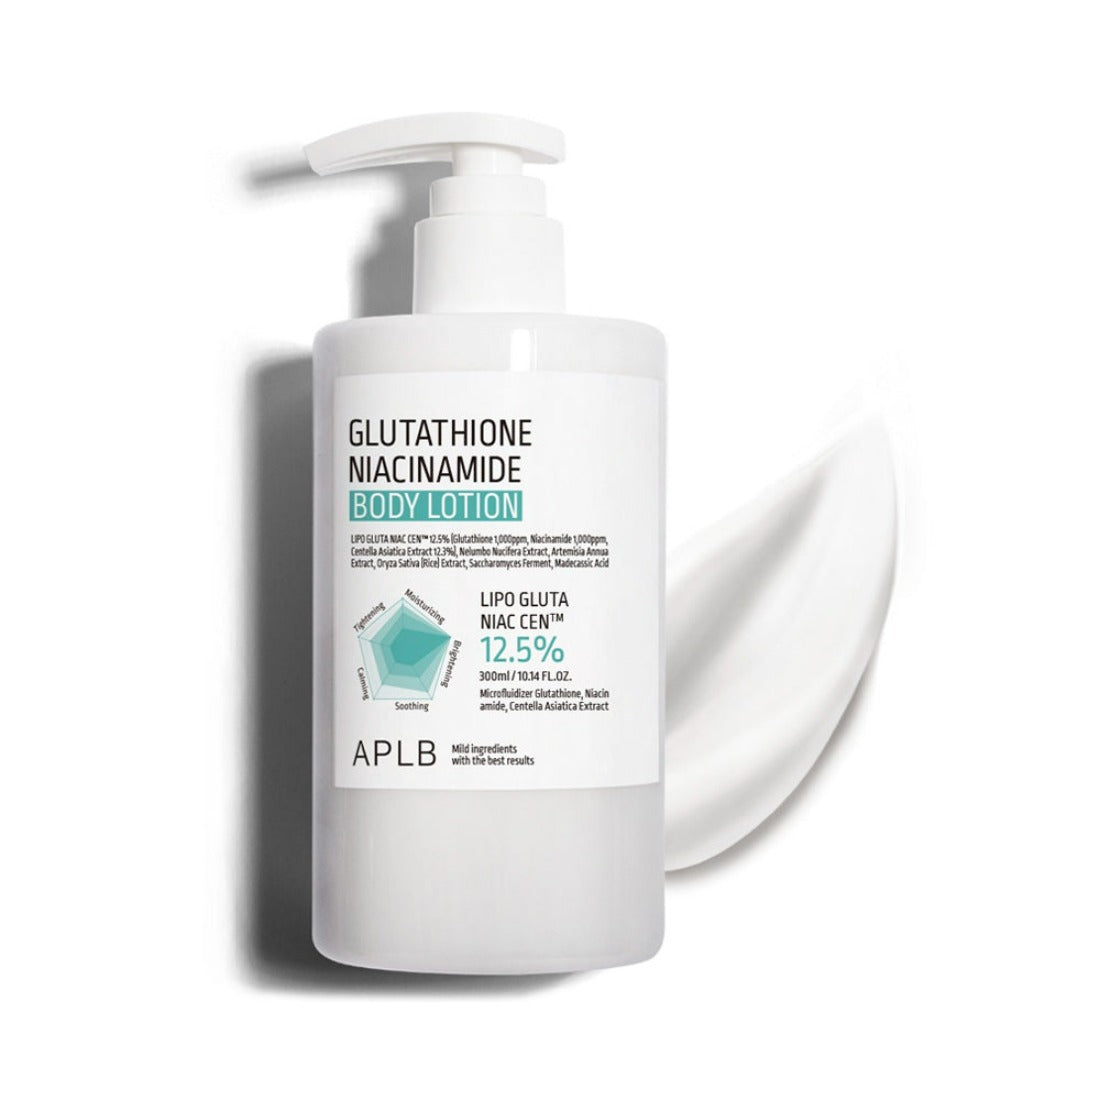 APLB Glutathione Niacinamide Body Lotion 300ml is a concentrated serum formulated with retinol to target various signs of aging and promote skin renewal